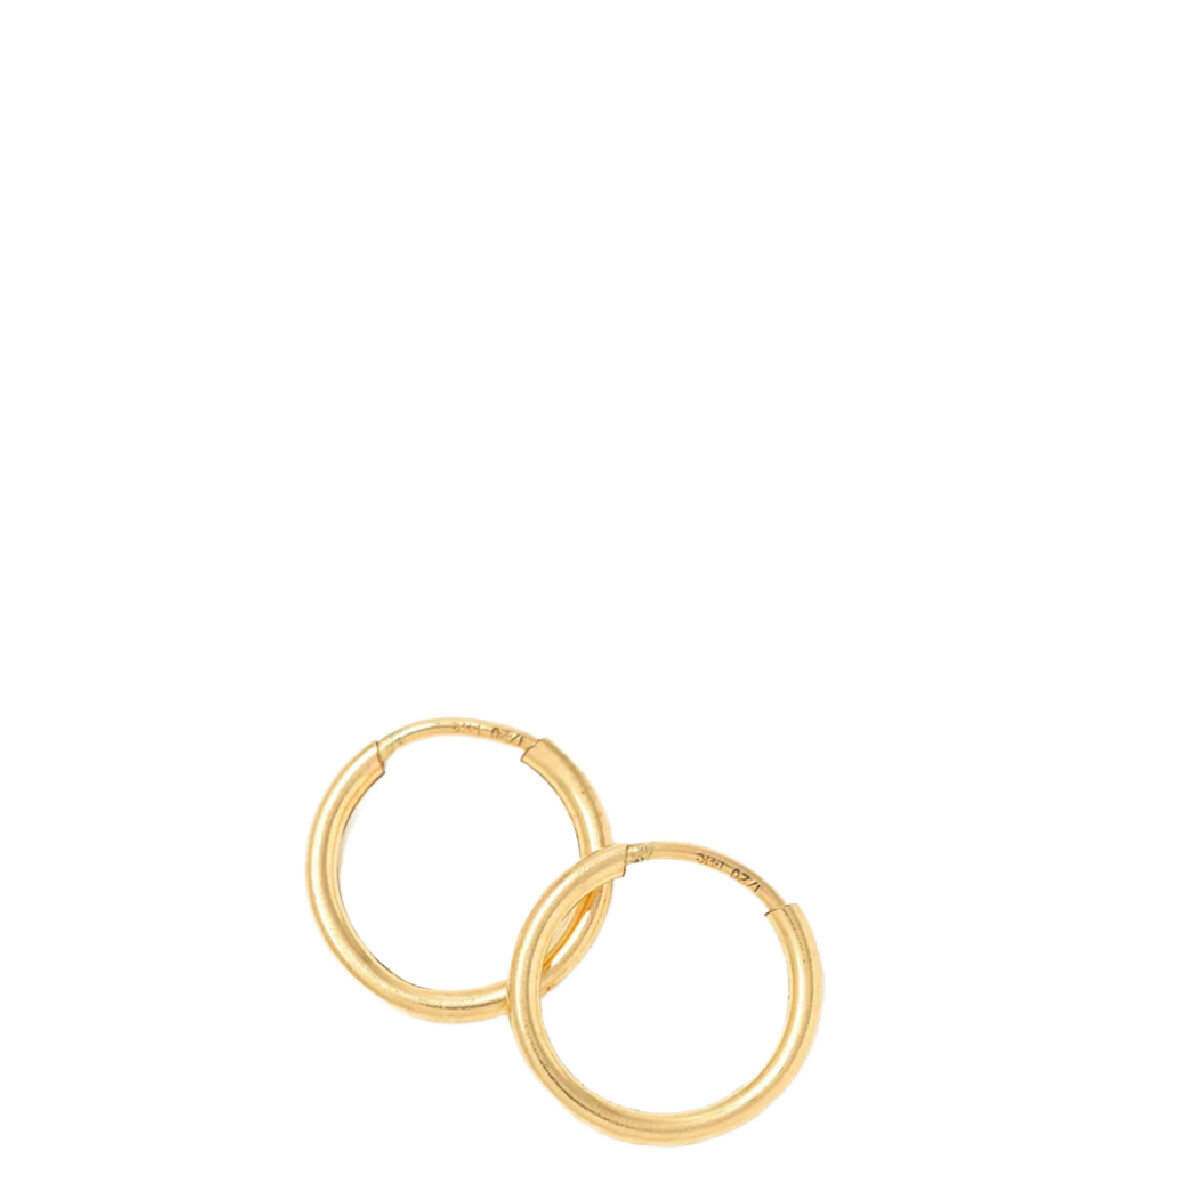 Lover's Tempo 12mm Gold-Filled Infinity Hoop Earrings